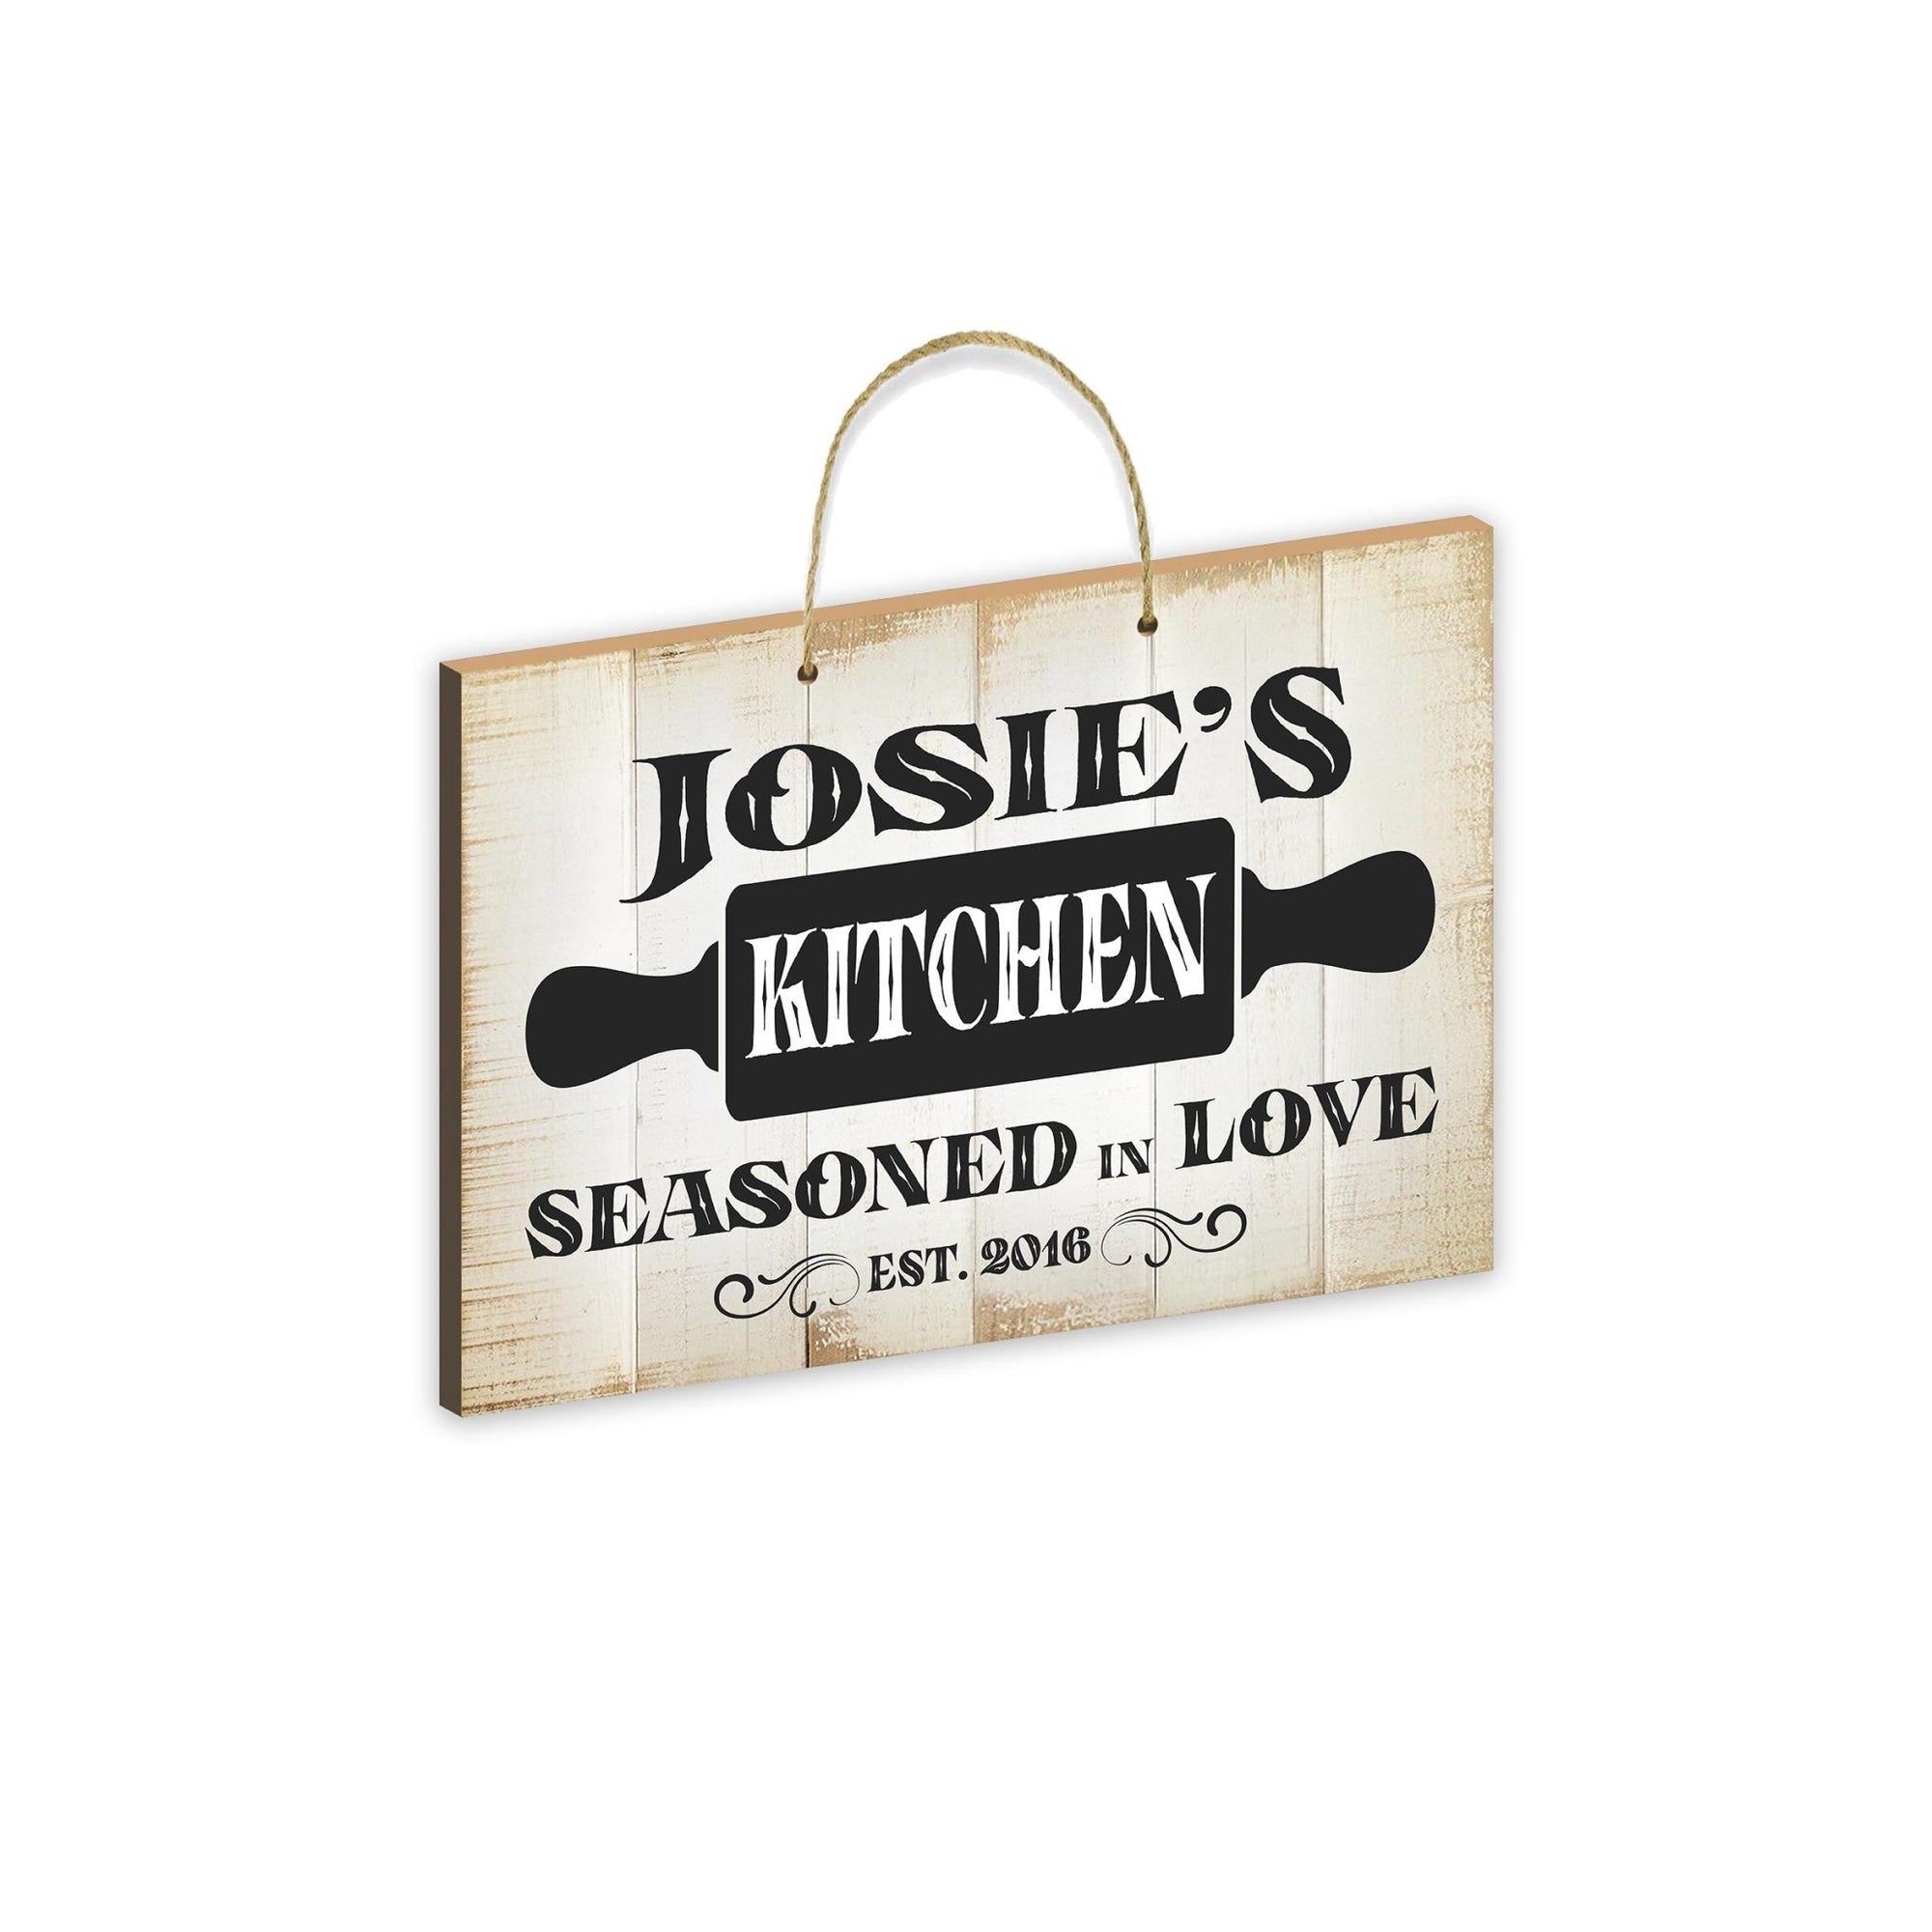 Inspirational Rustic Wooden Wall Hanging Rope Sign Kitchen Décor - Seasoned In Love [KITCHEN]